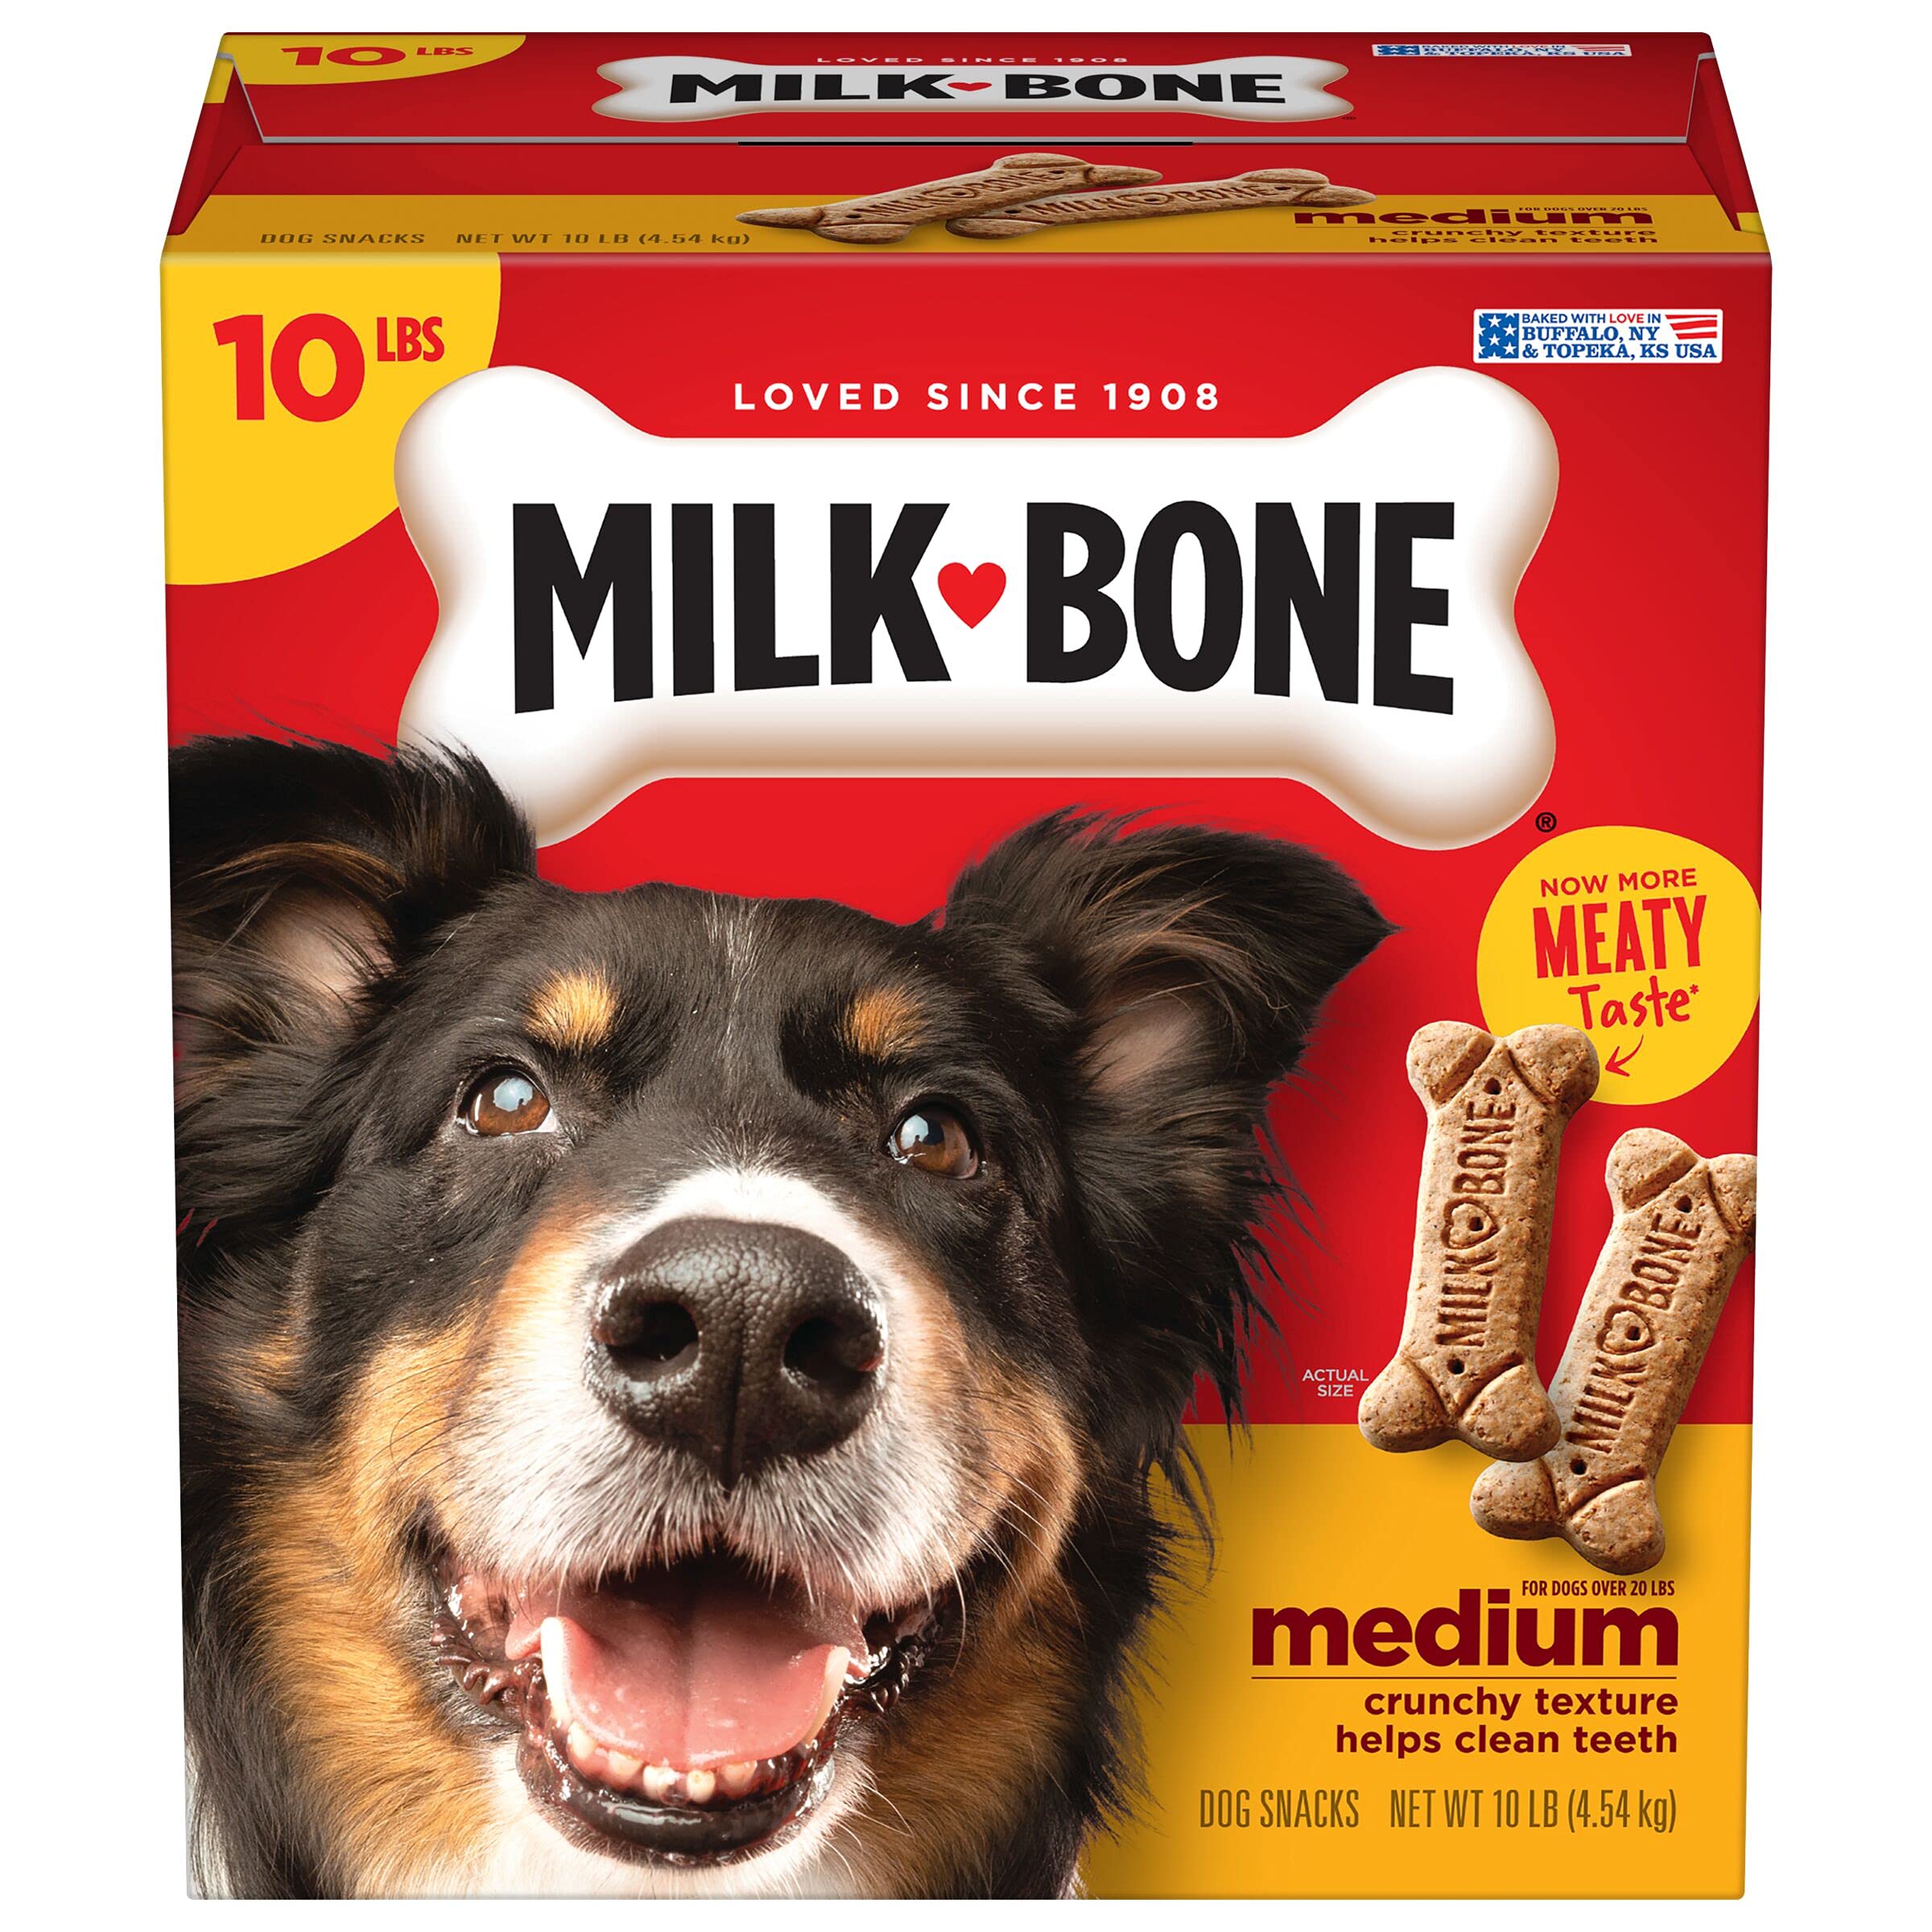 10-lbs Milk-Bone Original Dog Treats Biscuits (Medium or Large) $10.30 w/ S&S + Free Shipping w/ Prime or on $35+